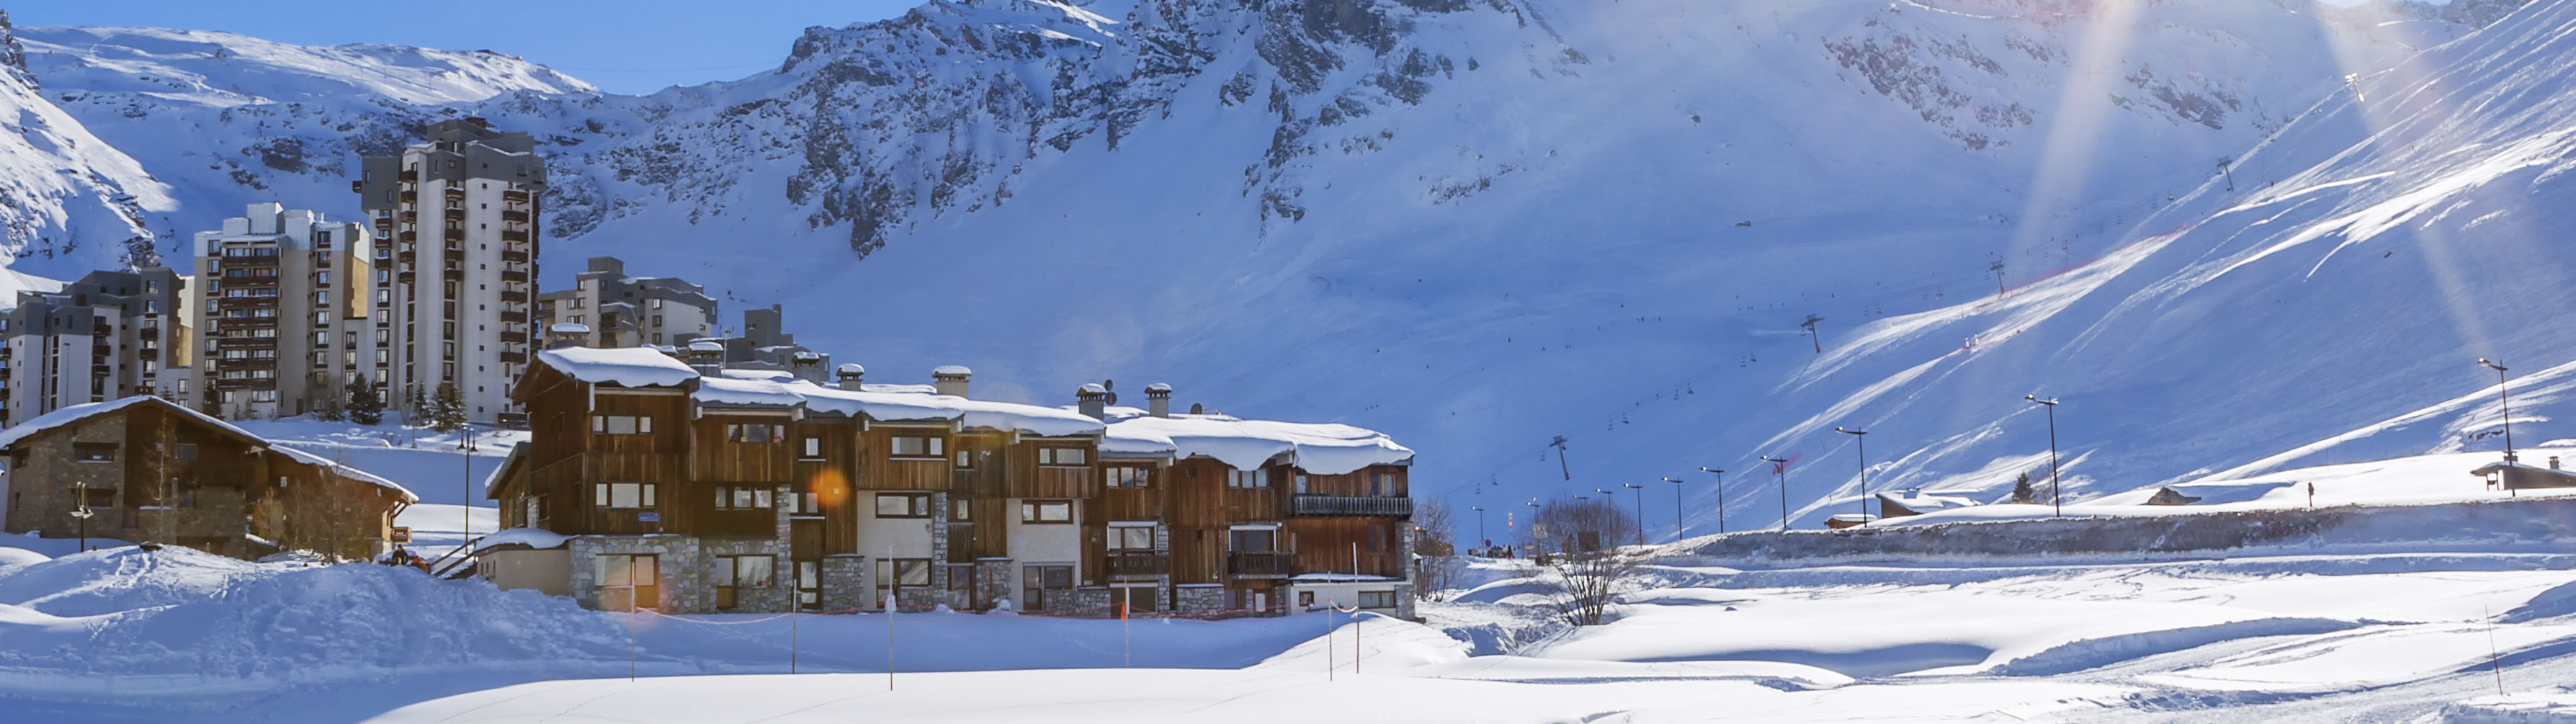 Private cabins lie before snow-packed slopes in Tignes.